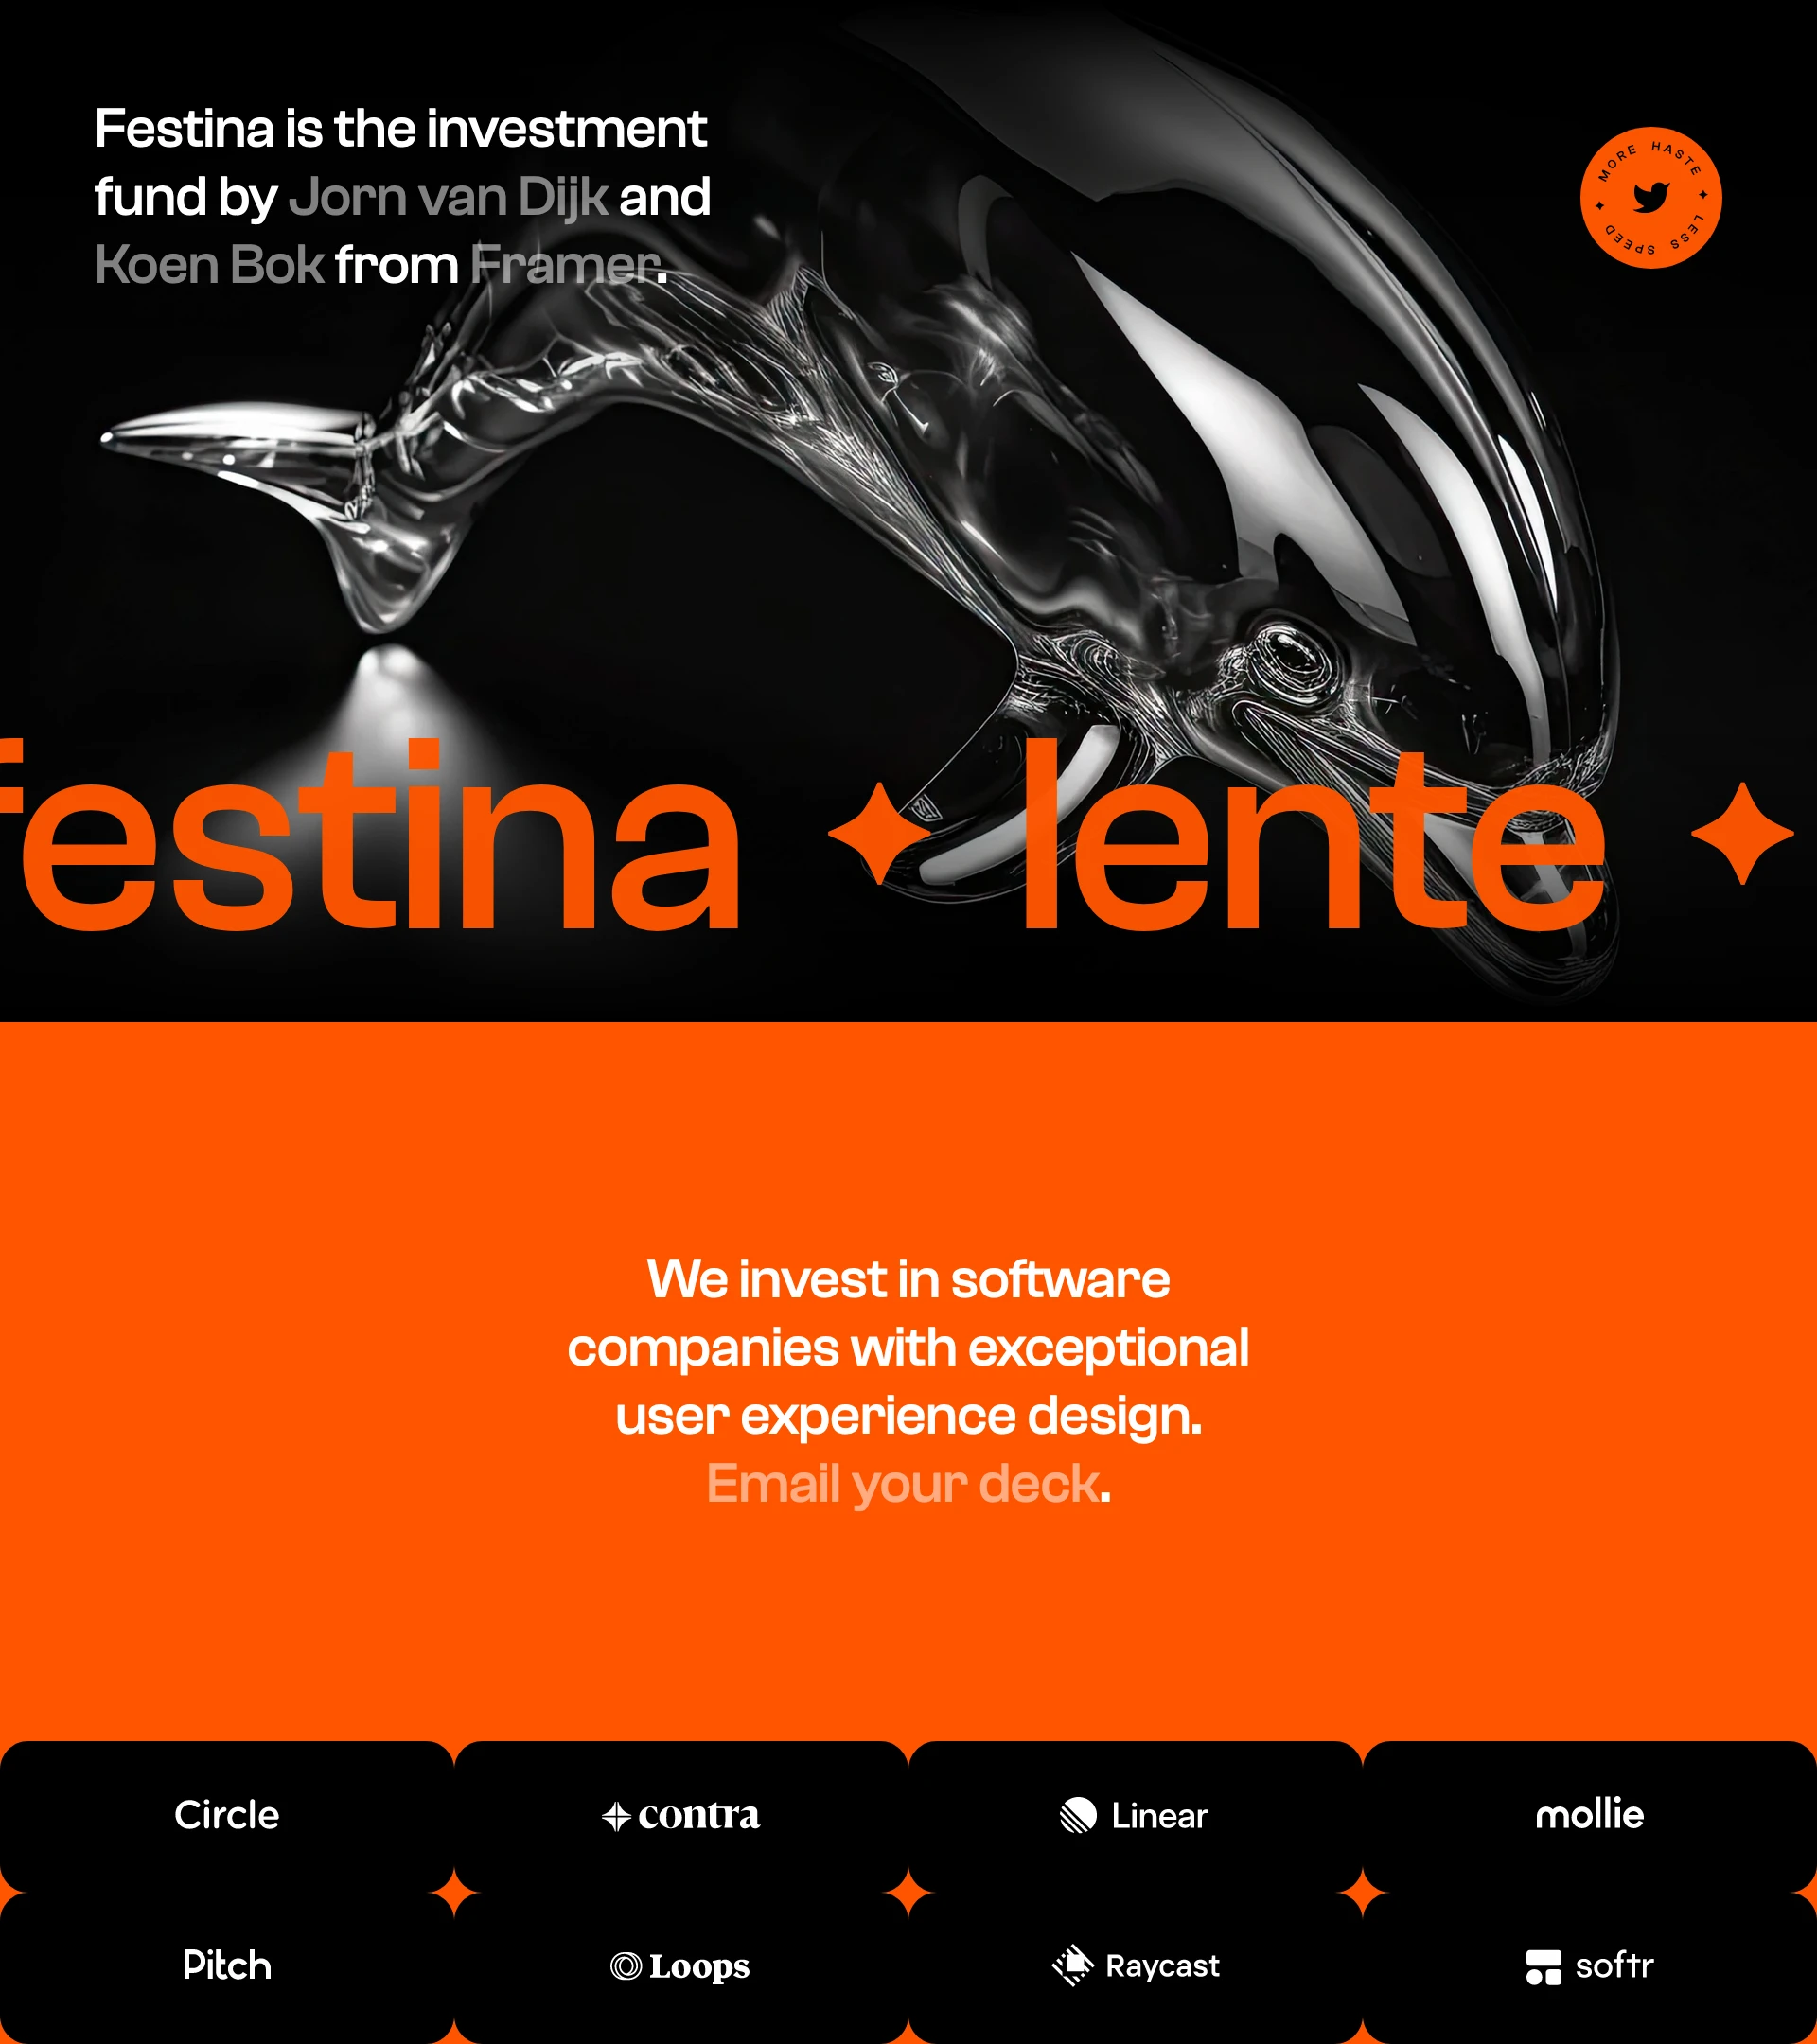 Festina Landing Page Example: Festina is the investment fund by Jorn van Dijk and Koen Bok from Framer. We invest in software companies with exceptional user experience design.